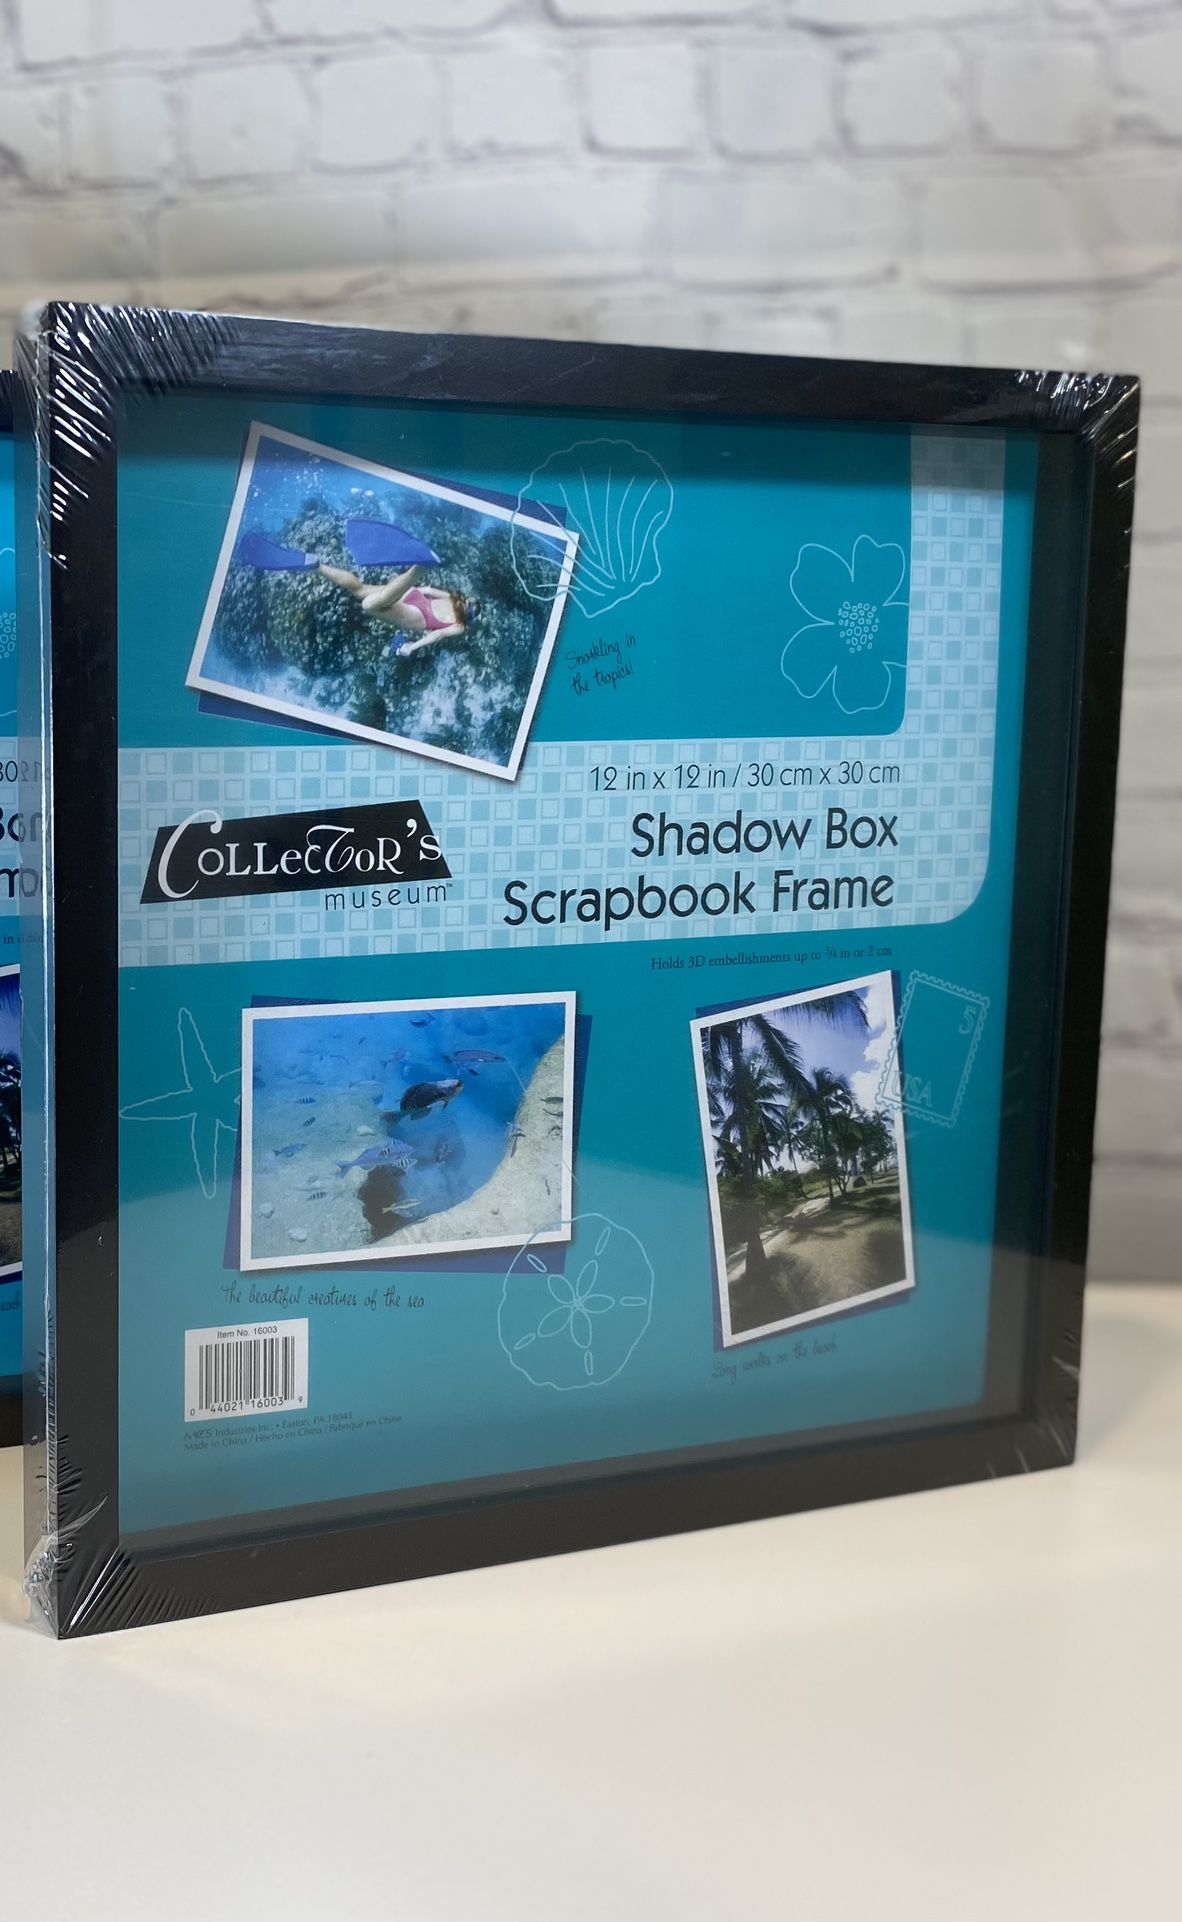 Stylish Shadow Box Frame 12x12” - New In Packaging!